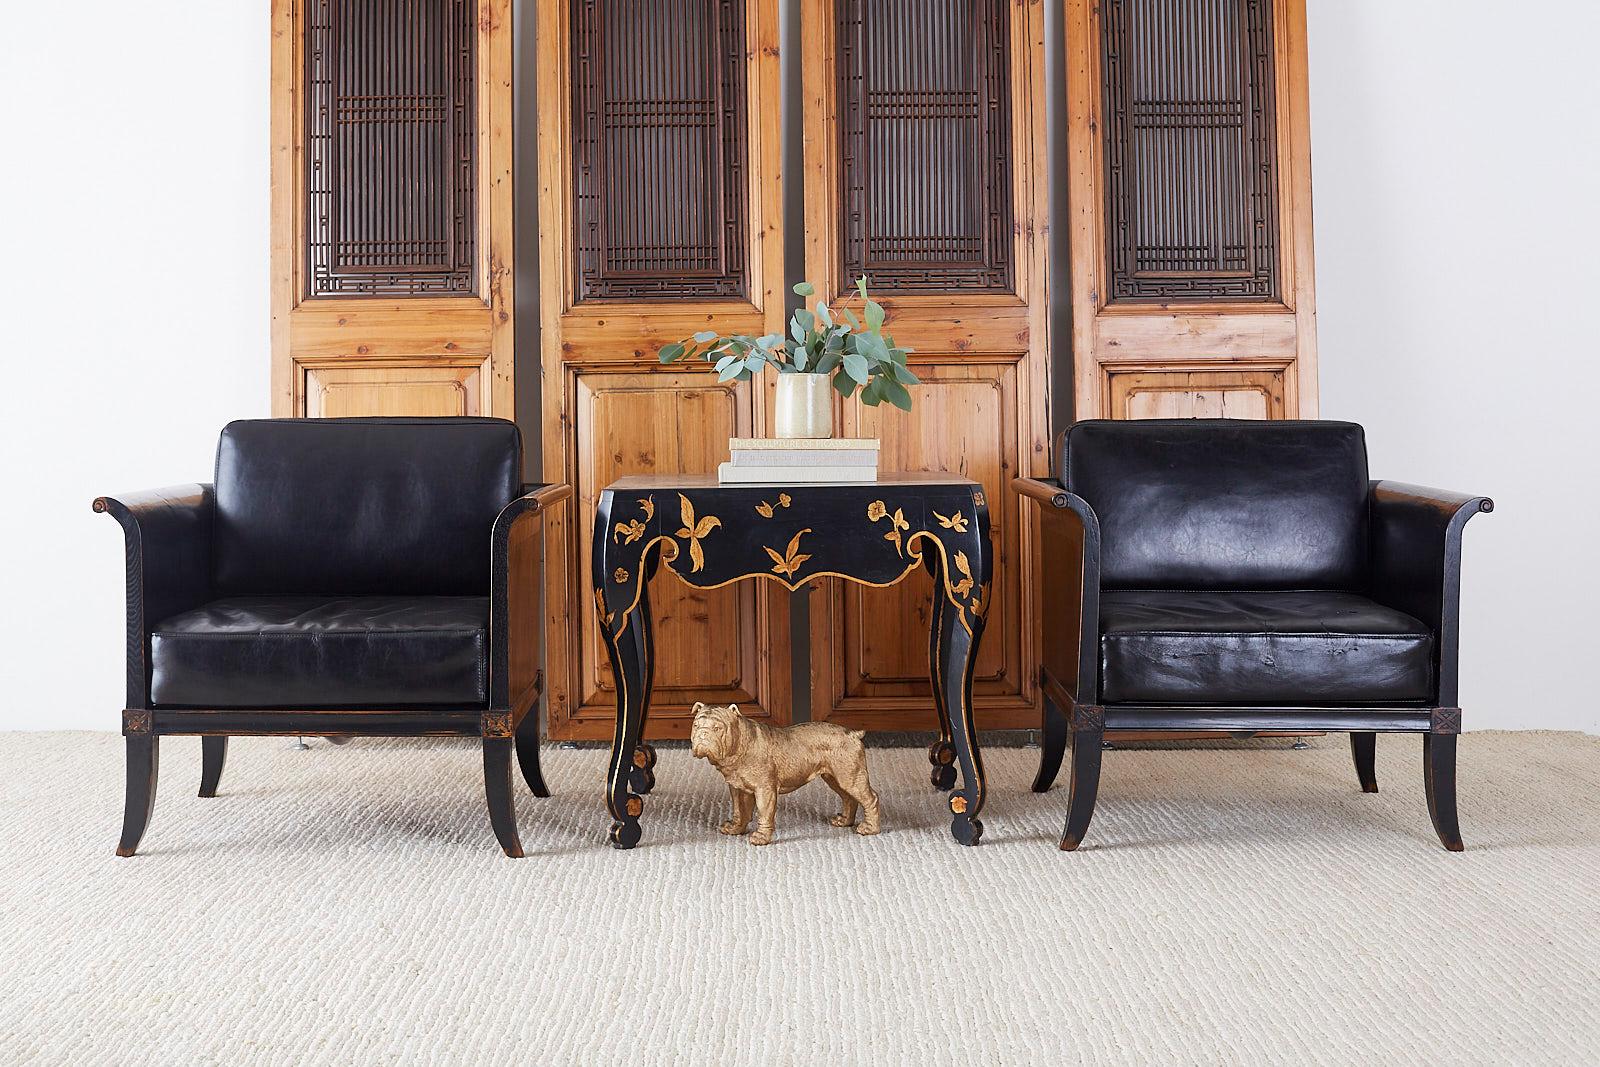 Dramatic pair of oak lacquered cube chairs or club chairs made in the neoclassical style. Features a distressed black lacquer wood finish with a low sleek profile. The arms and back have scrolled ends and the seat is fitted with thick, faux leather